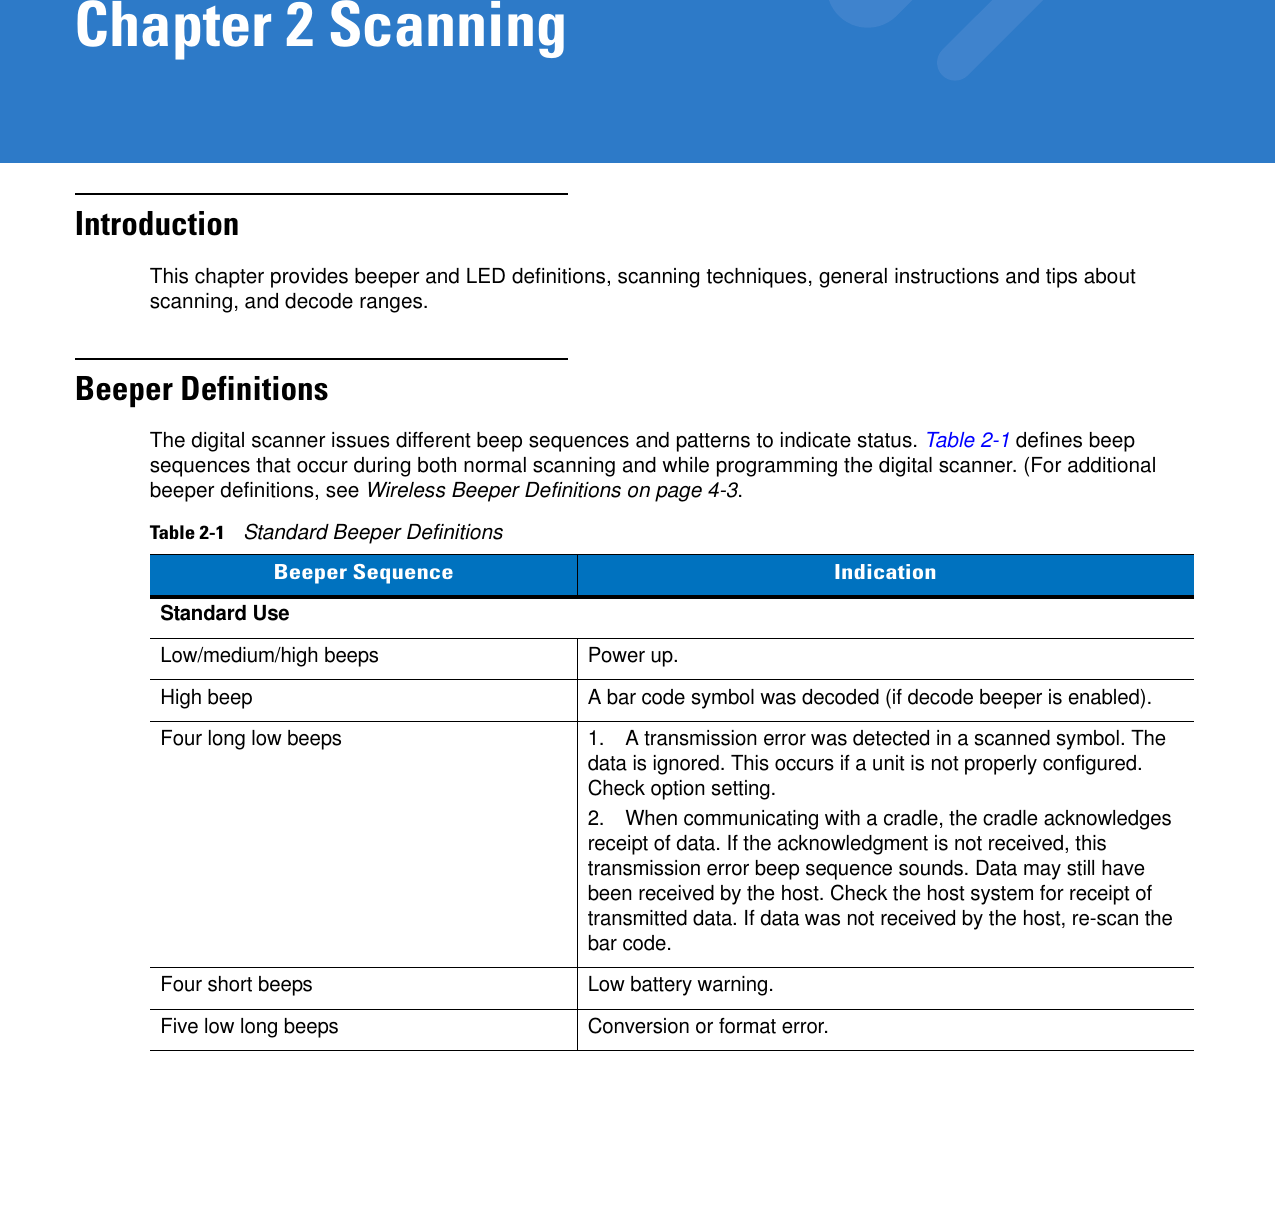 Chapter 2 ScanningIntroductionThis chapter provides beeper and LED definitions, scanning techniques, general instructions and tips about scanning, and decode ranges.Beeper DefinitionsThe digital scanner issues different beep sequences and patterns to indicate status. Table 2-1 defines beep sequences that occur during both normal scanning and while programming the digital scanner. (For additional beeper definitions, see Wireless Beeper Definitions on page 4-3.Table 2-1    Standard Beeper DefinitionsBeeper Sequence IndicationStandard UseLow/medium/high beeps Power up.High beep A bar code symbol was decoded (if decode beeper is enabled).Four long low beeps 1. A transmission error was detected in a scanned symbol. The data is ignored. This occurs if a unit is not properly configured. Check option setting.2. When communicating with a cradle, the cradle acknowledges receipt of data. If the acknowledgment is not received, this transmission error beep sequence sounds. Data may still have been received by the host. Check the host system for receipt of transmitted data. If data was not received by the host, re-scan the bar code.Four short beeps Low battery warning.Five low long beeps Conversion or format error.